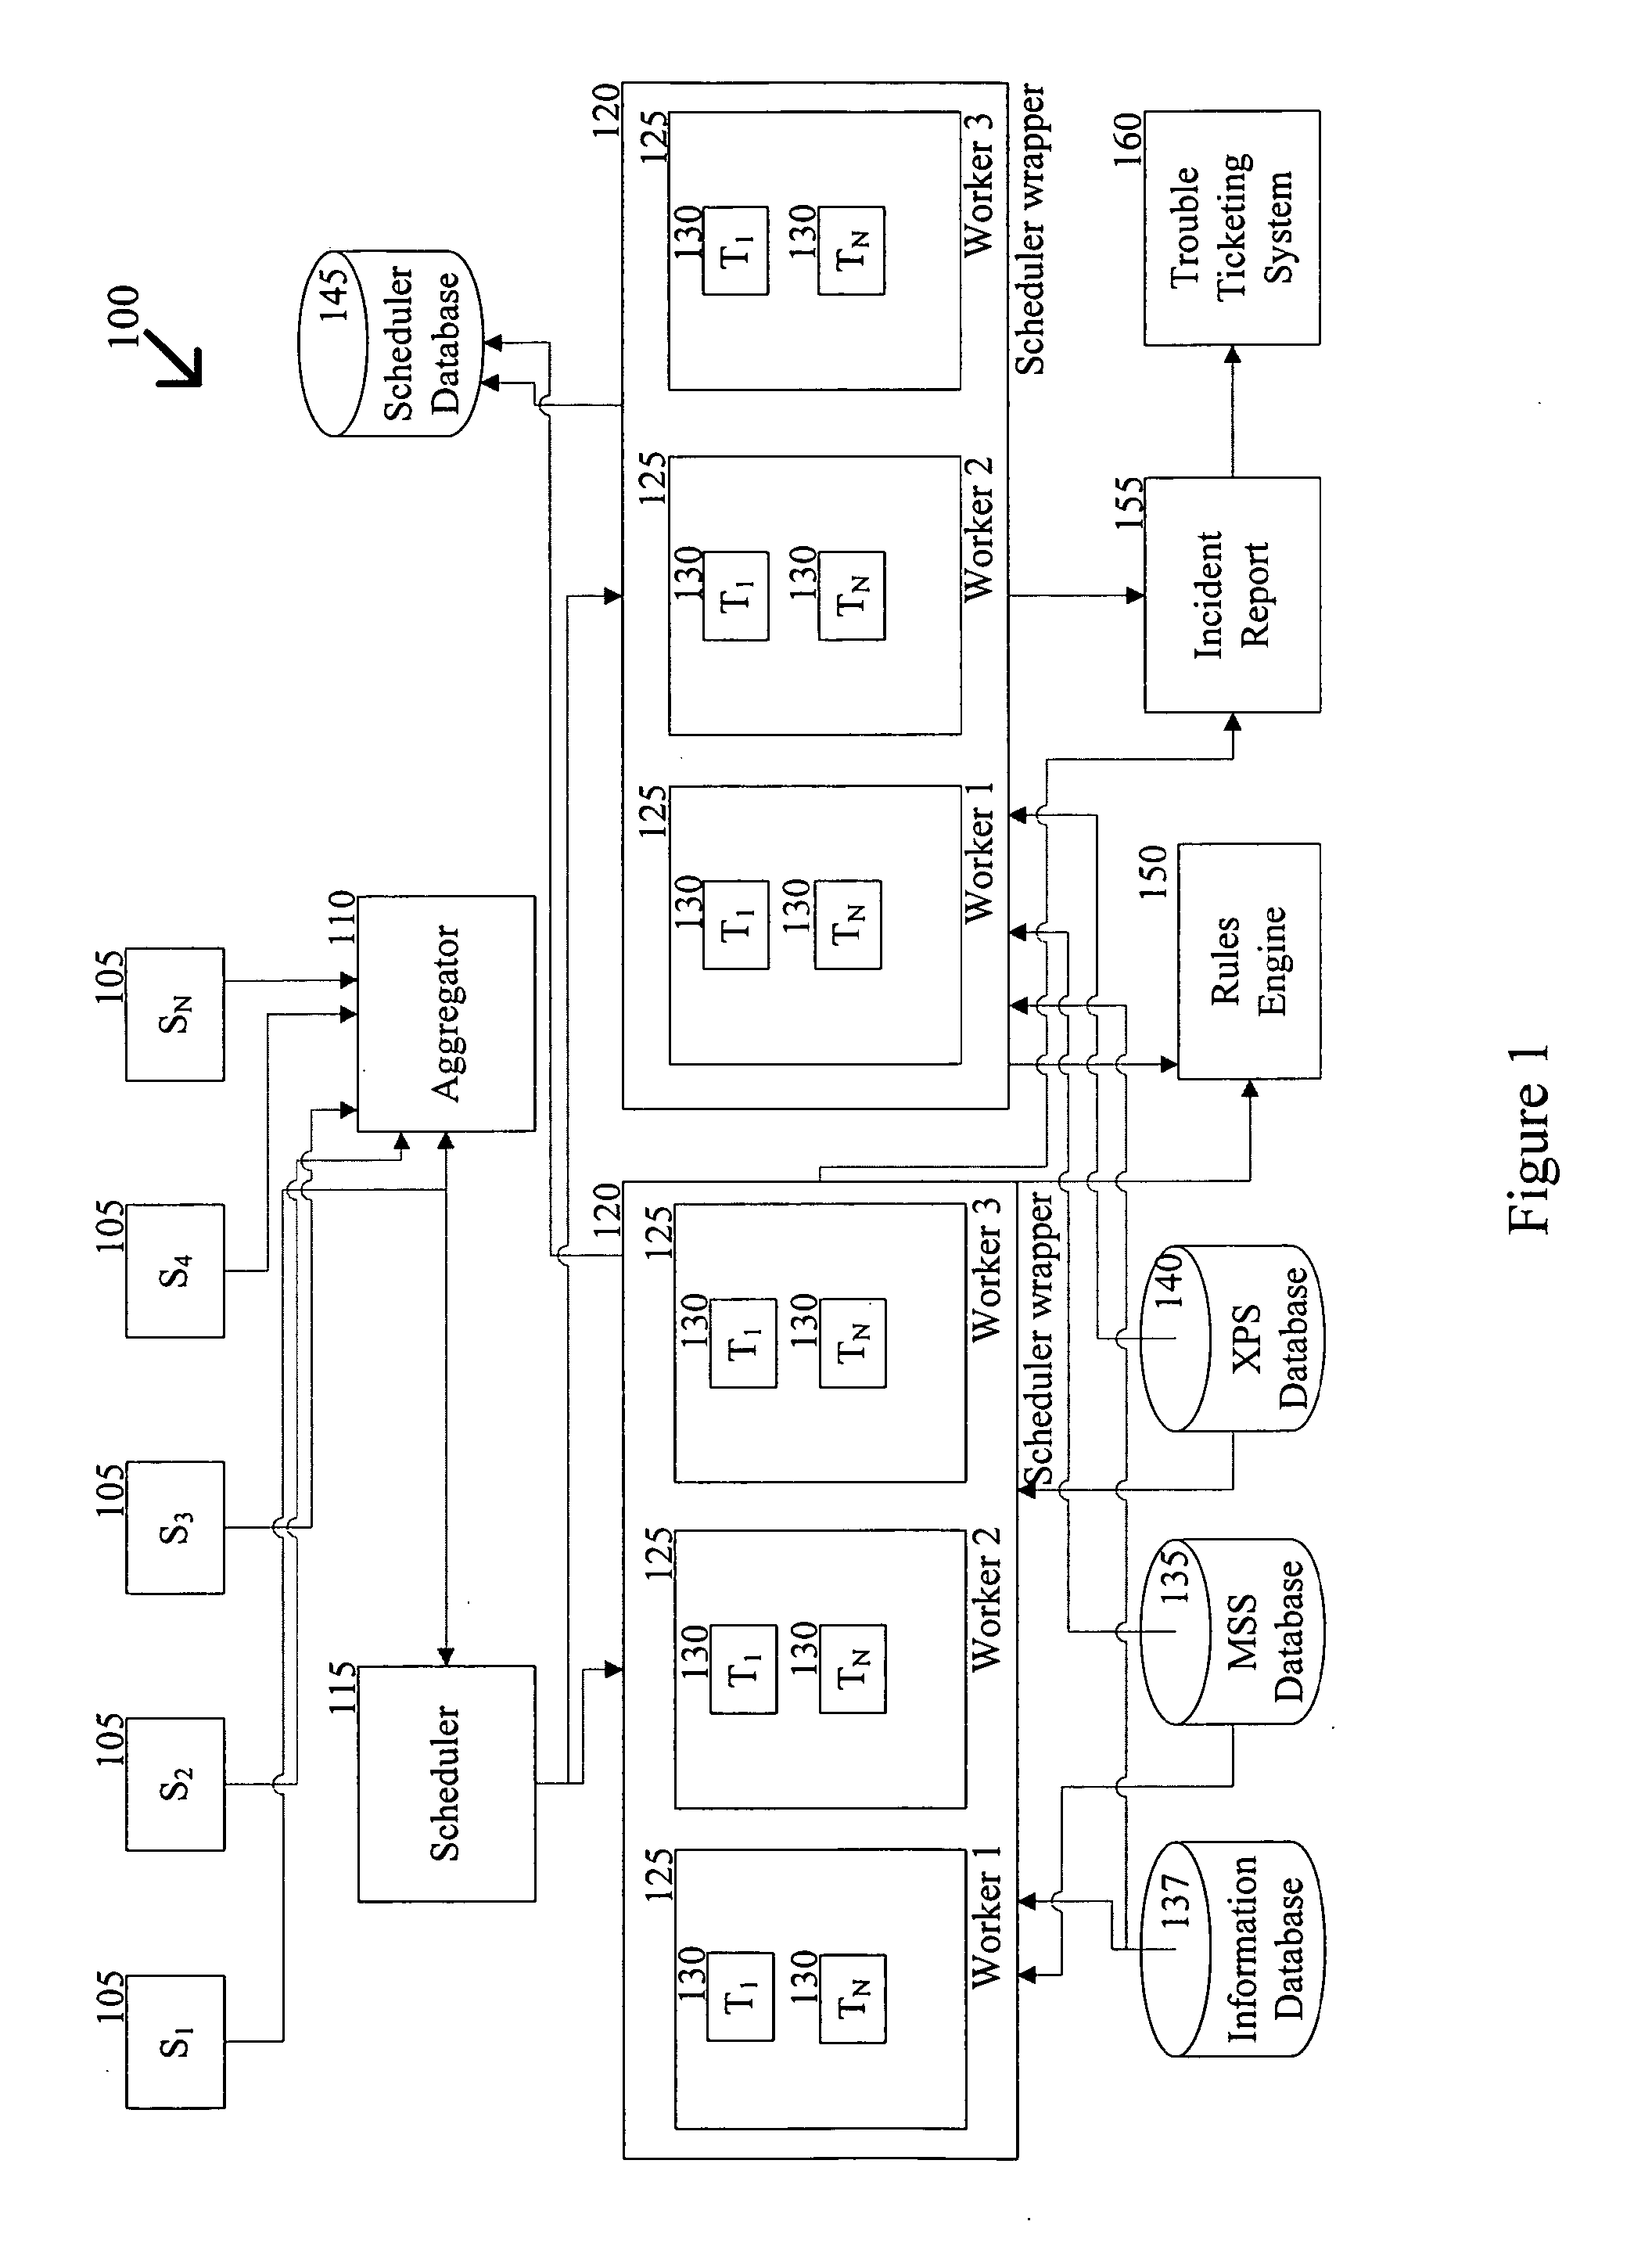 Method and System for Analysis of Security Events in a Managed Computer Network